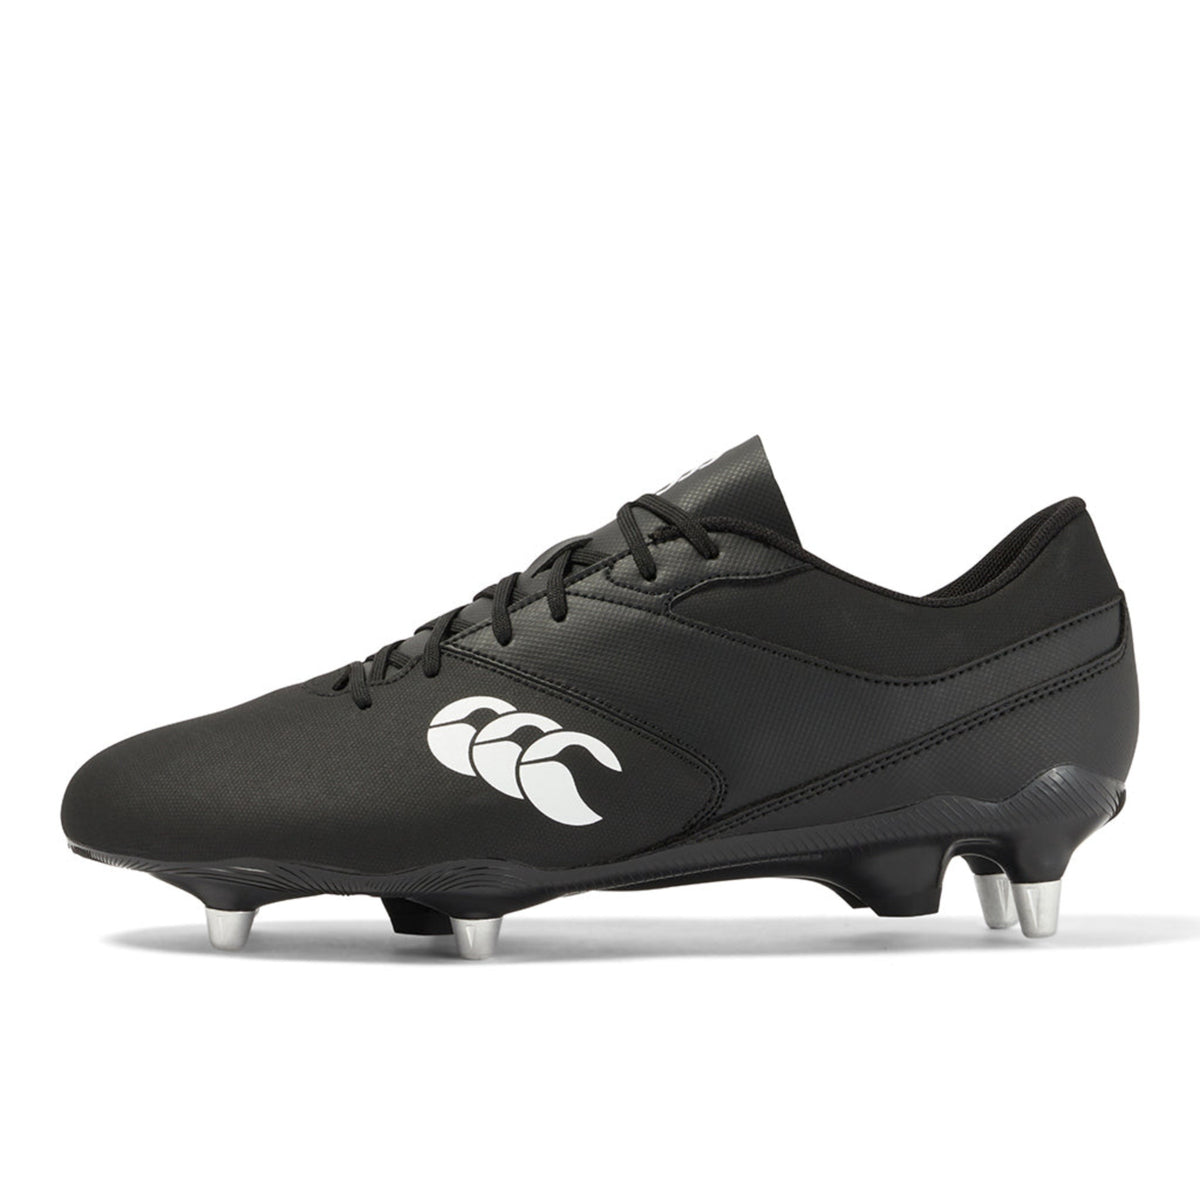 Canterbury Phoenix Raze SG Cleats a High-Performance Quality CCC Rugby Boot Black/White Available in Unisex Sizing 6-16